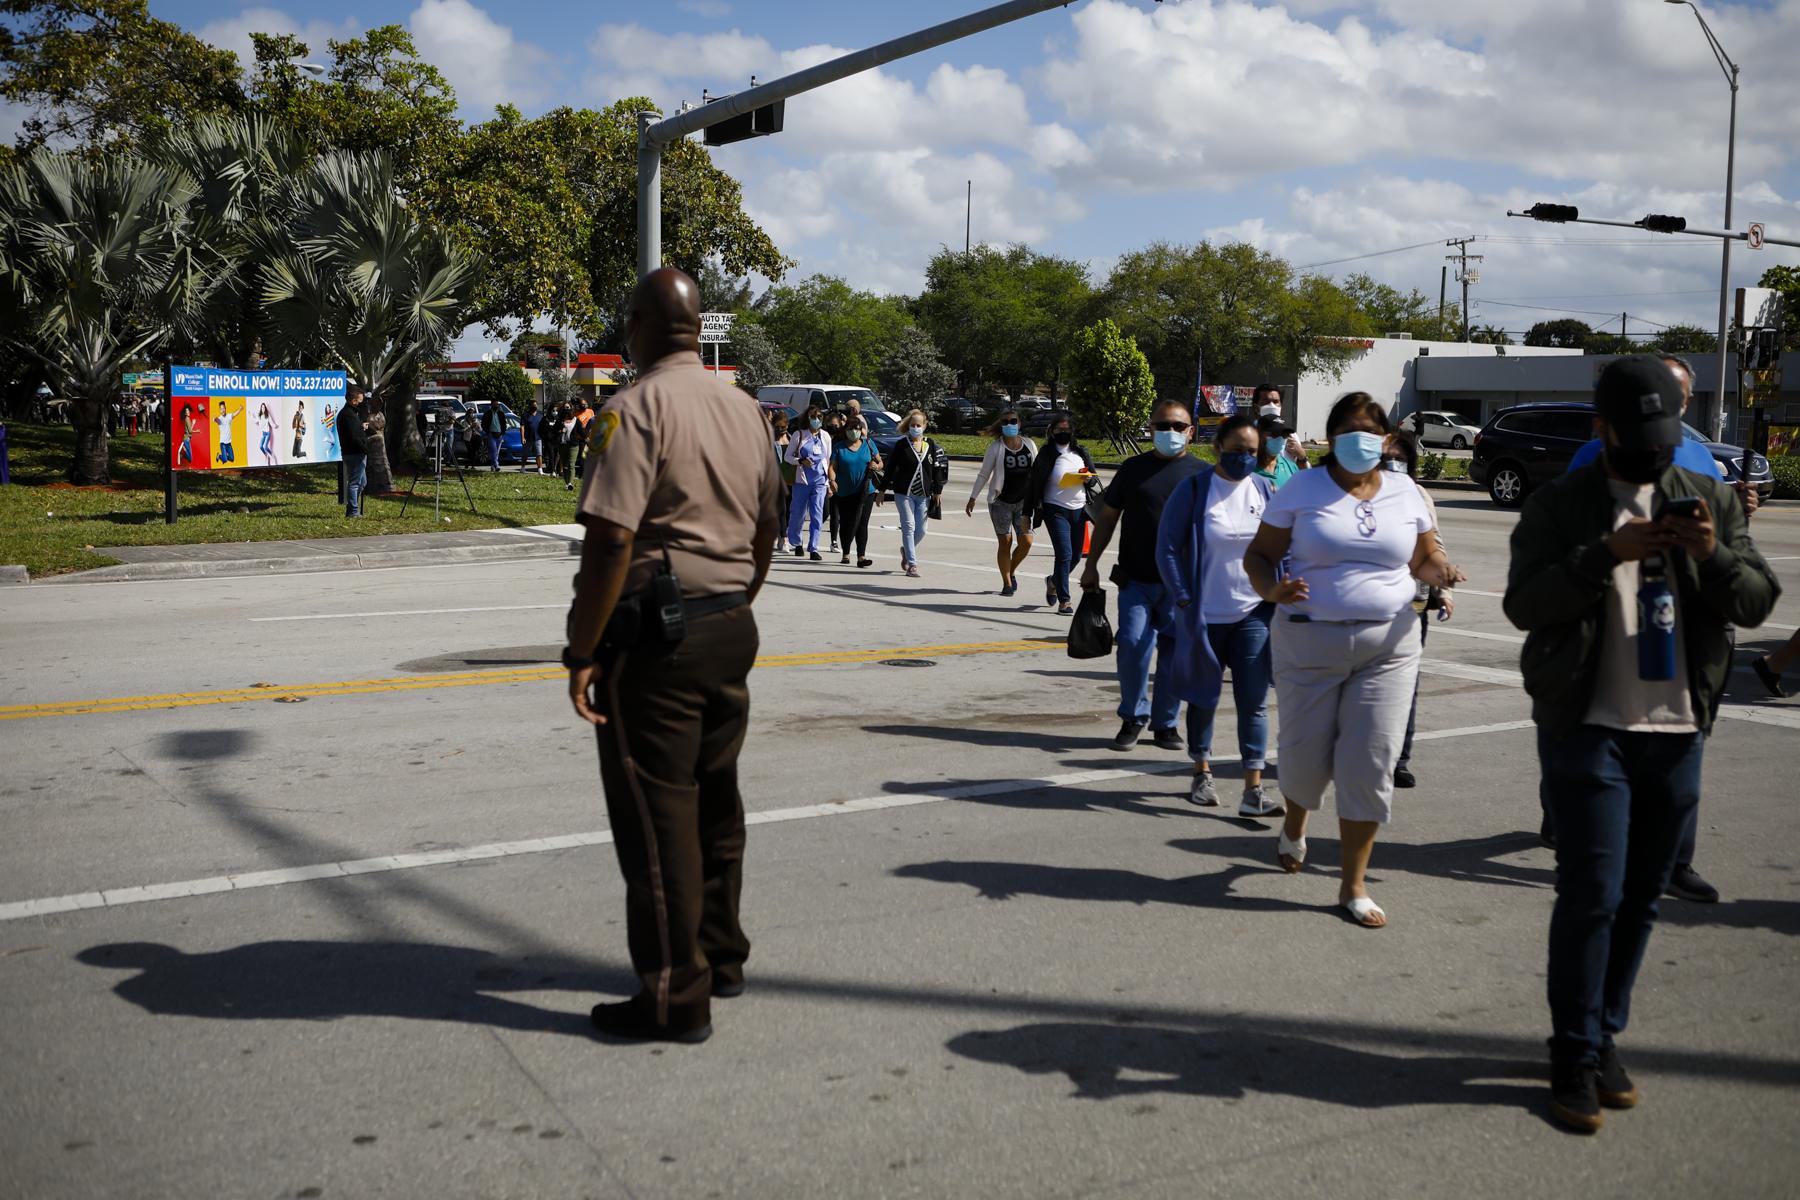 2021  - FEMA vaccination facility in North Miami - People wait in line to get the COVID-19 vaccine in a...